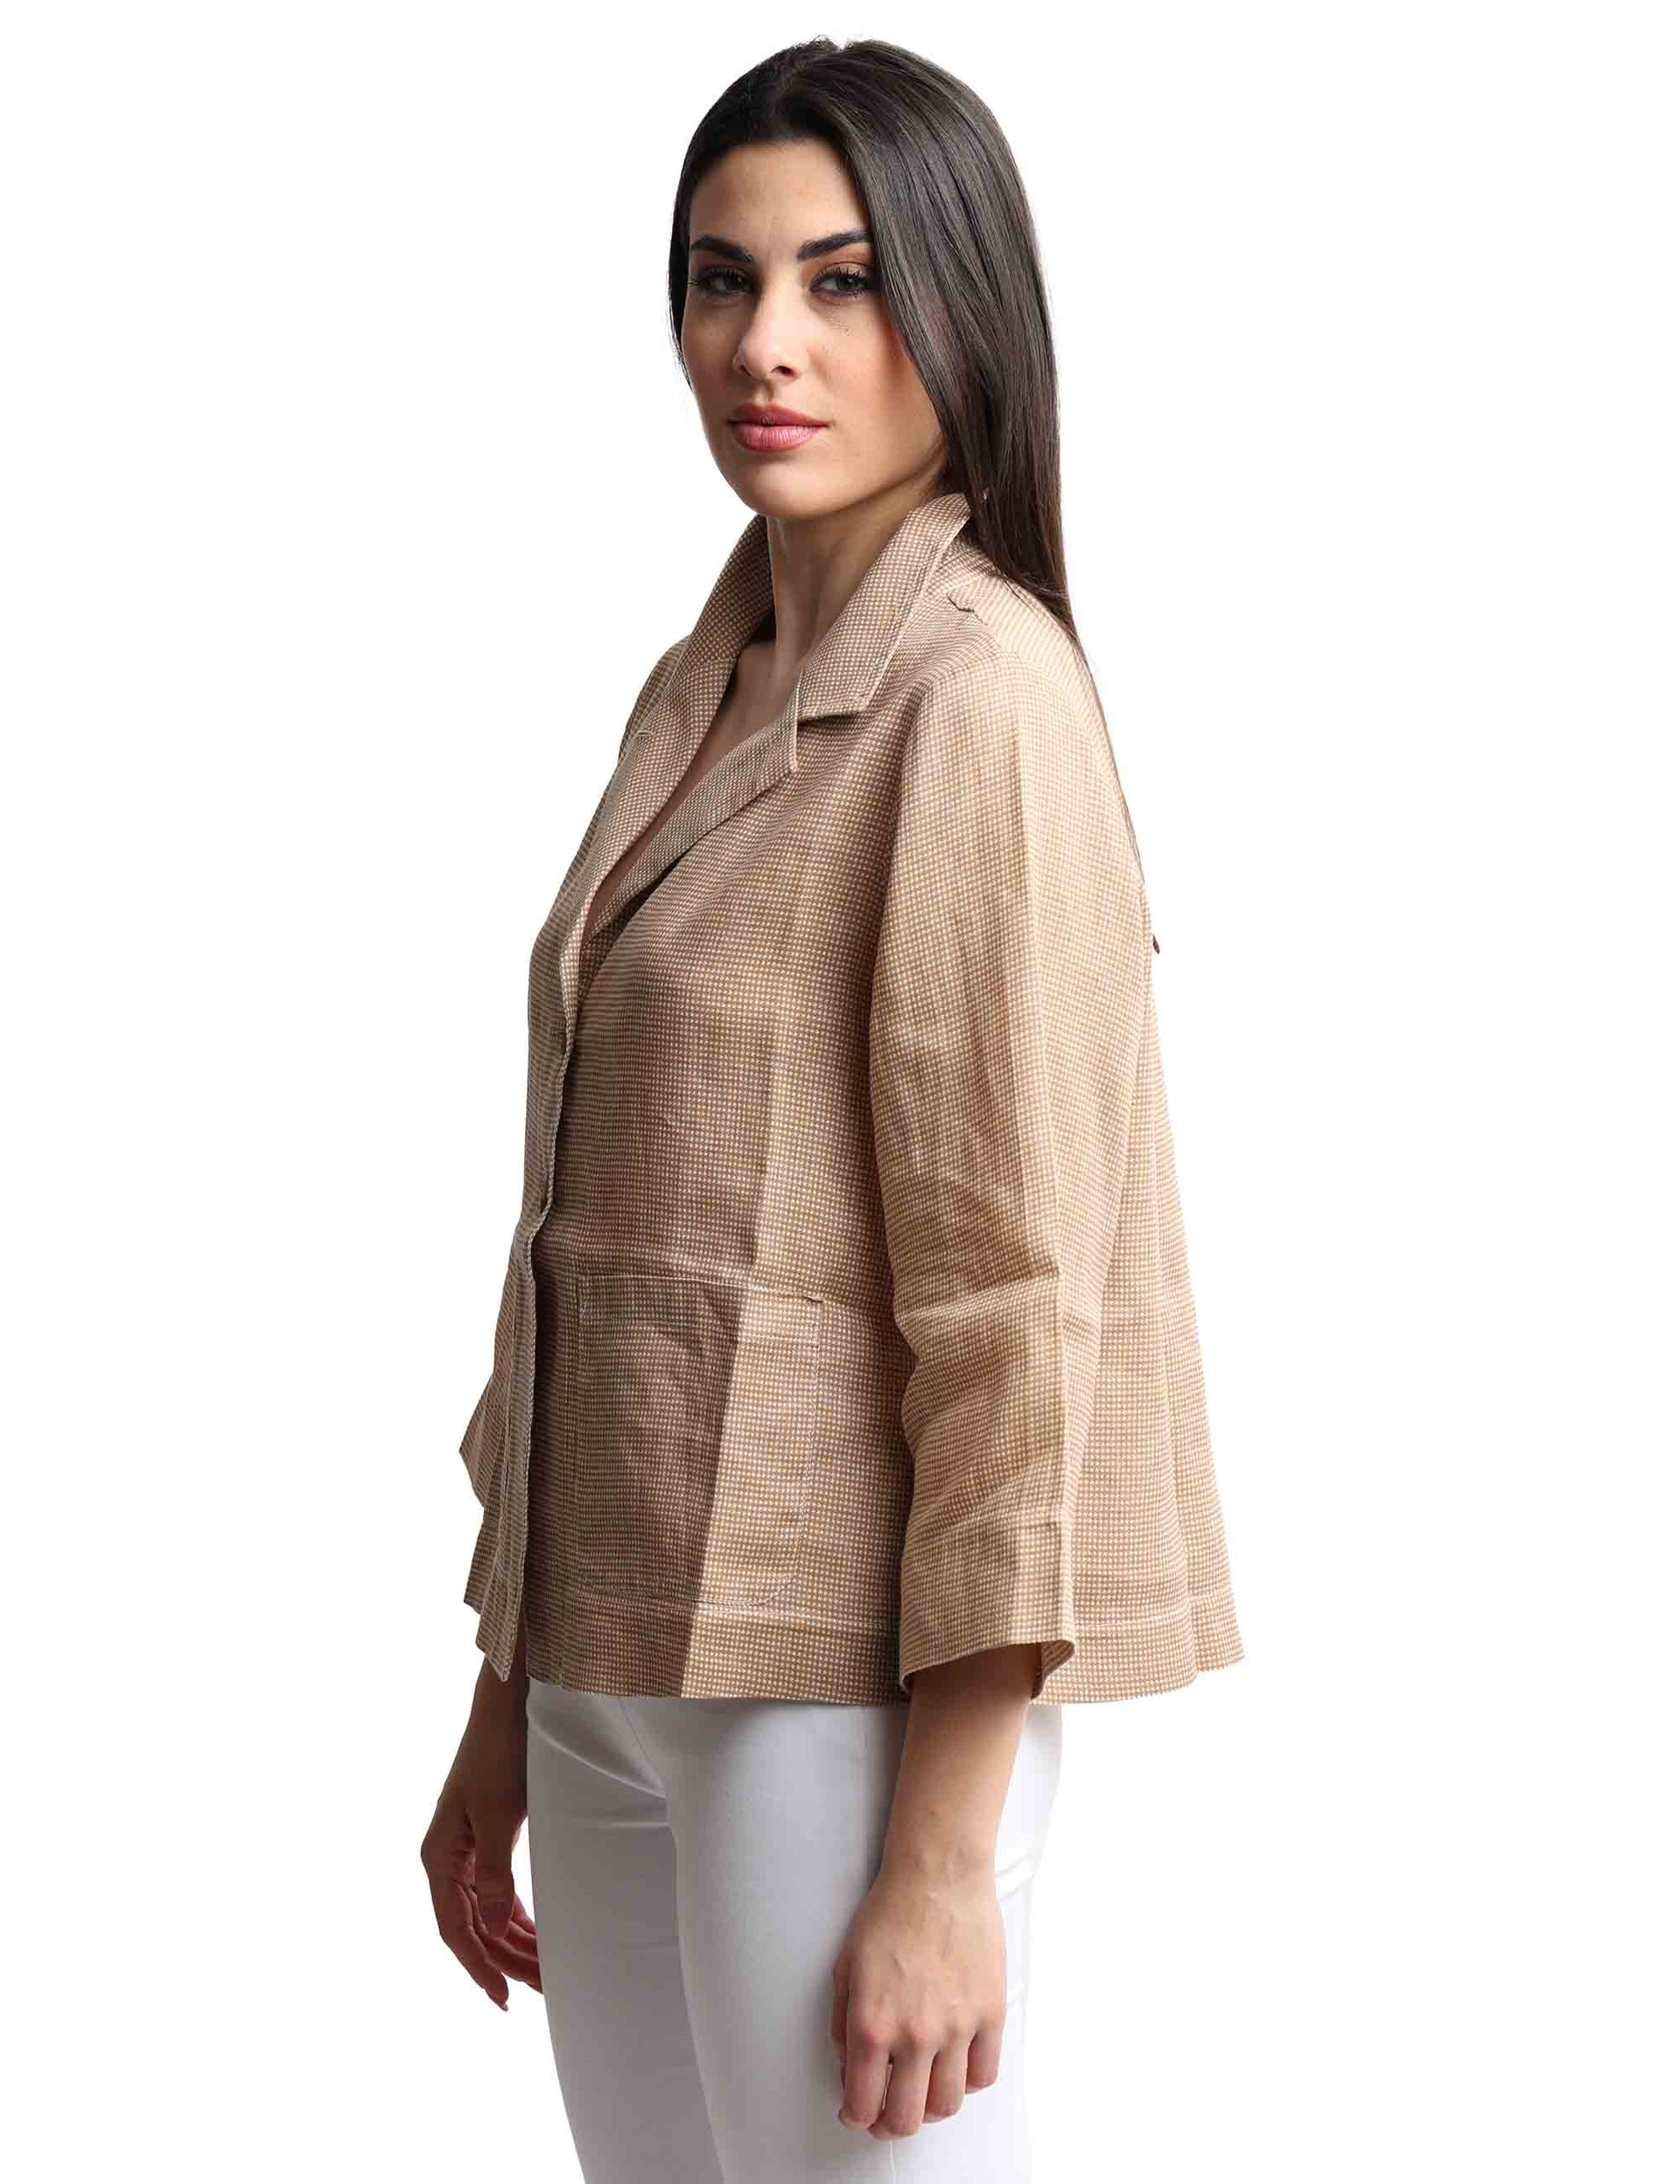 Single-breasted women's jackets in natural linen with 3/4 sleeves